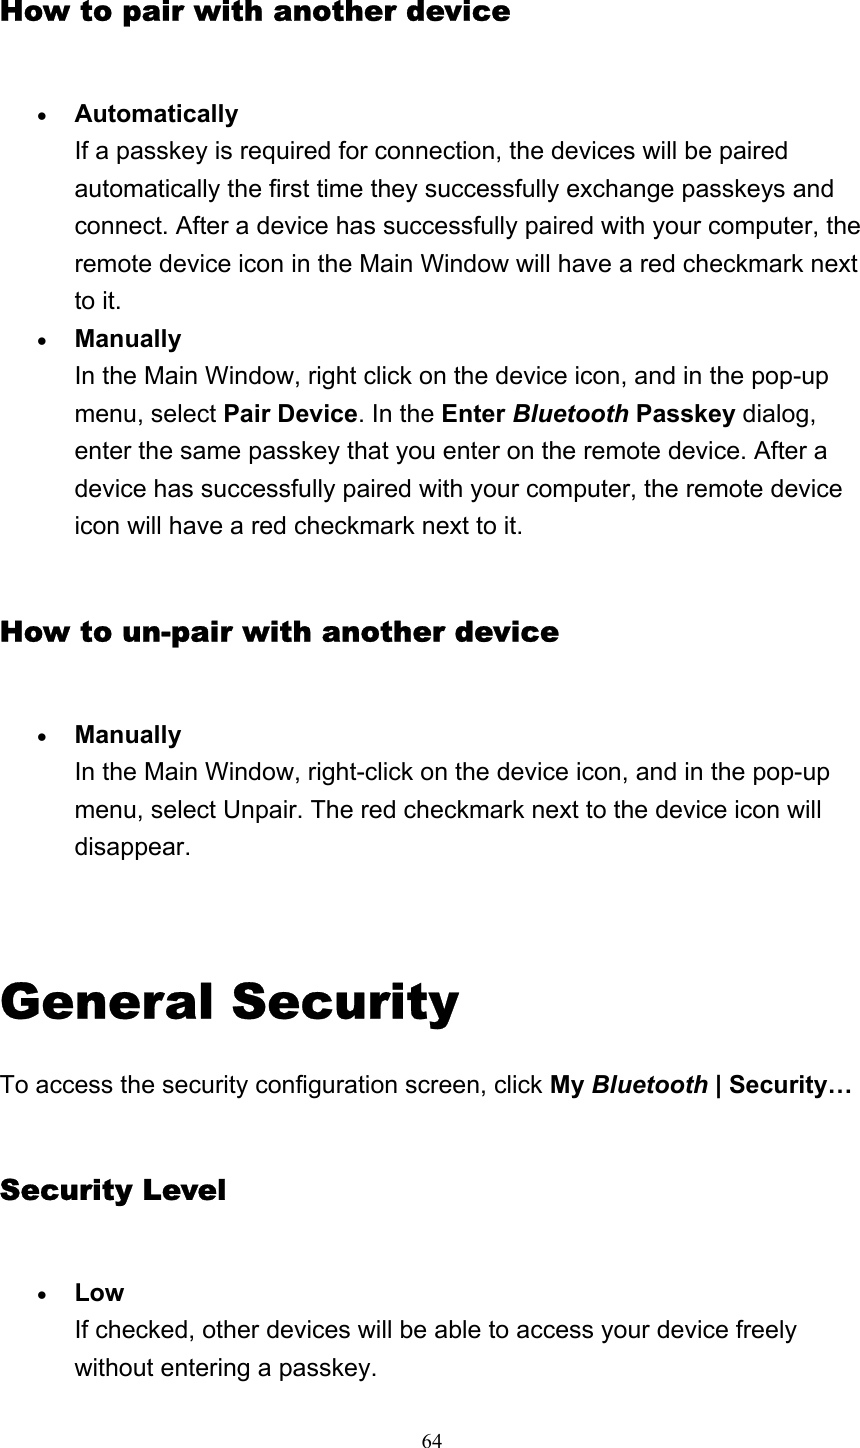   64How to pair with another device • Automatically If a passkey is required for connection, the devices will be paired automatically the first time they successfully exchange passkeys and connect. After a device has successfully paired with your computer, the remote device icon in the Main Window will have a red checkmark next to it.   • Manually In the Main Window, right click on the device icon, and in the pop-up menu, select Pair Device. In the Enter Bluetooth Passkey dialog, enter the same passkey that you enter on the remote device. After a device has successfully paired with your computer, the remote device icon will have a red checkmark next to it.   How to un-pair with another device • Manually In the Main Window, right-click on the device icon, and in the pop-up menu, select Unpair. The red checkmark next to the device icon will disappear.    General Security To access the security configuration screen, click My Bluetooth | Security… Security Level • Low If checked, other devices will be able to access your device freely without entering a passkey. 